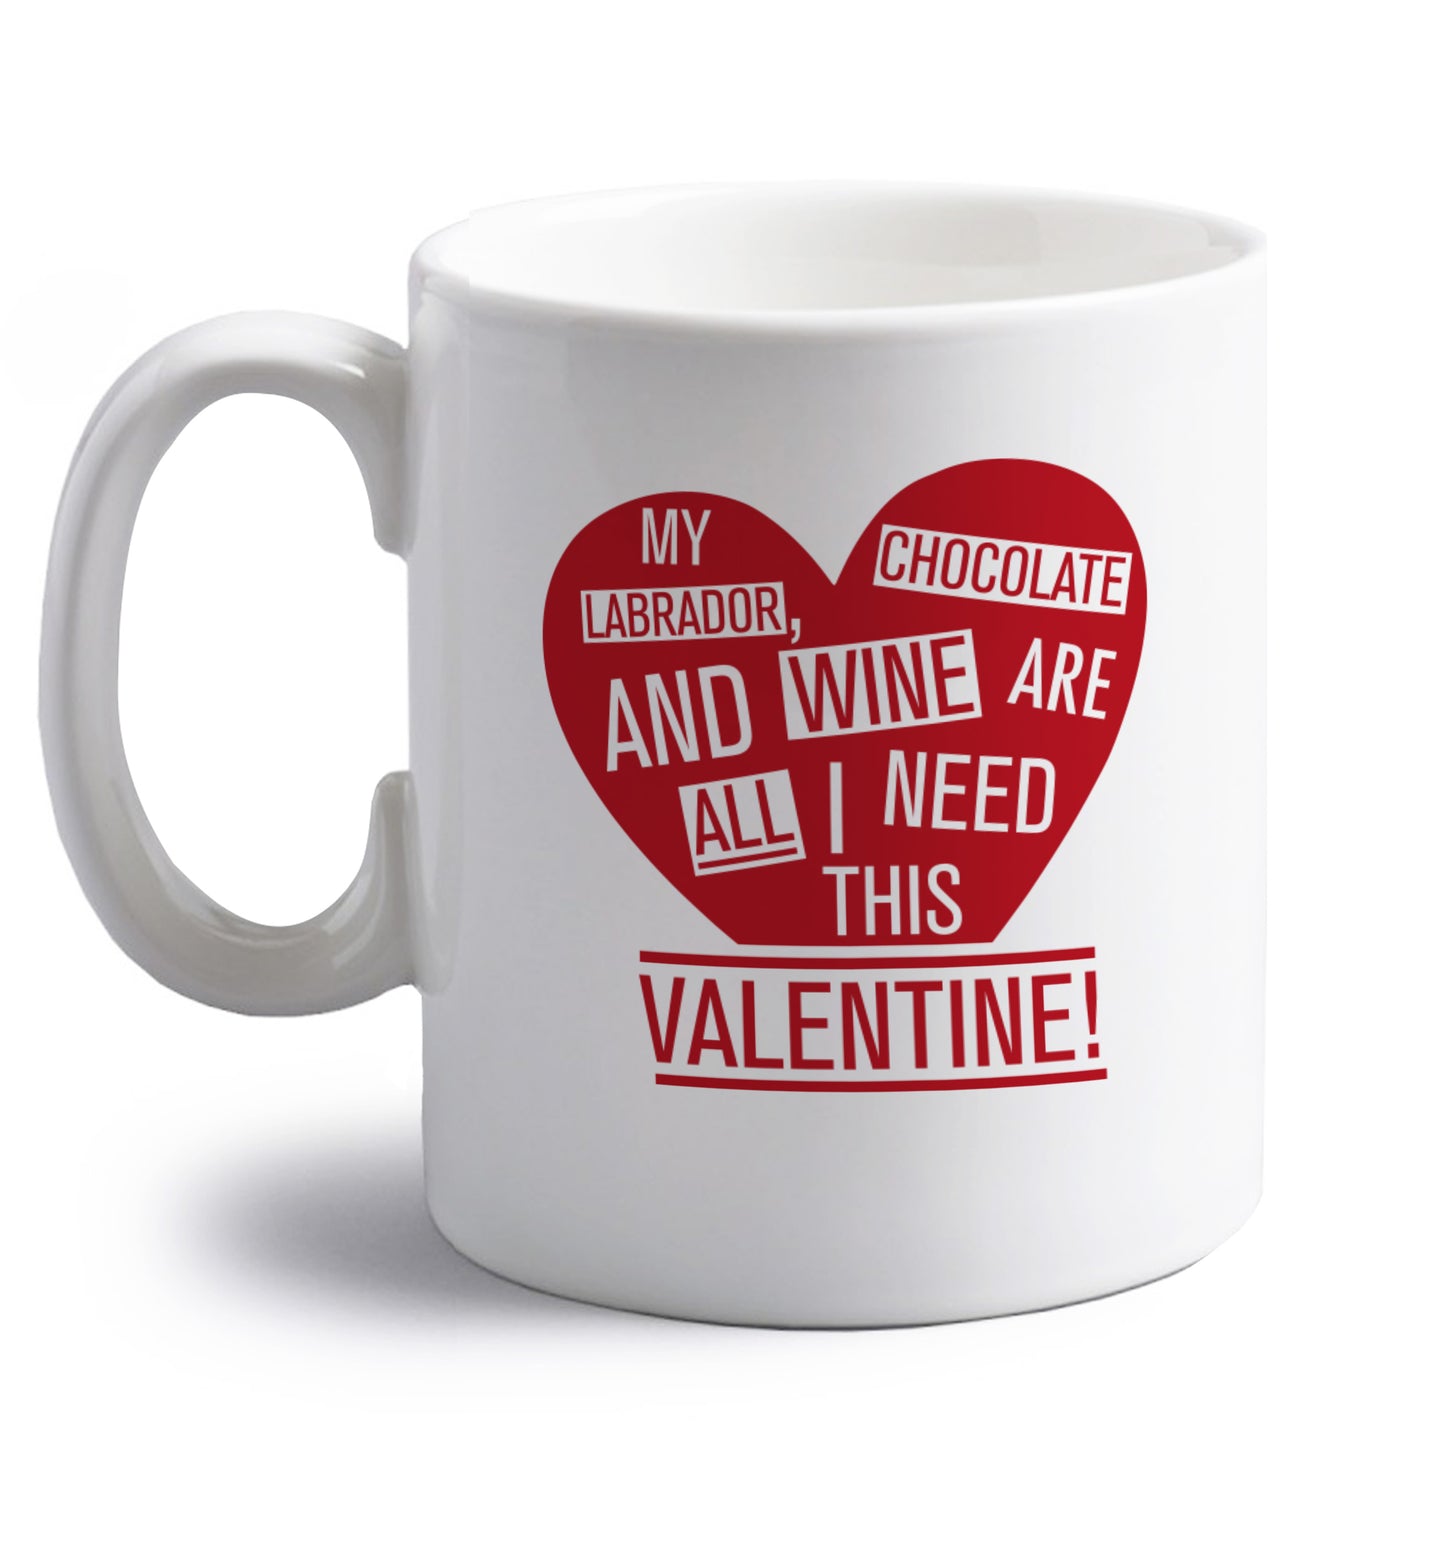 My labrador, chocolate and wine are all I need this valentine! right handed white ceramic mug 